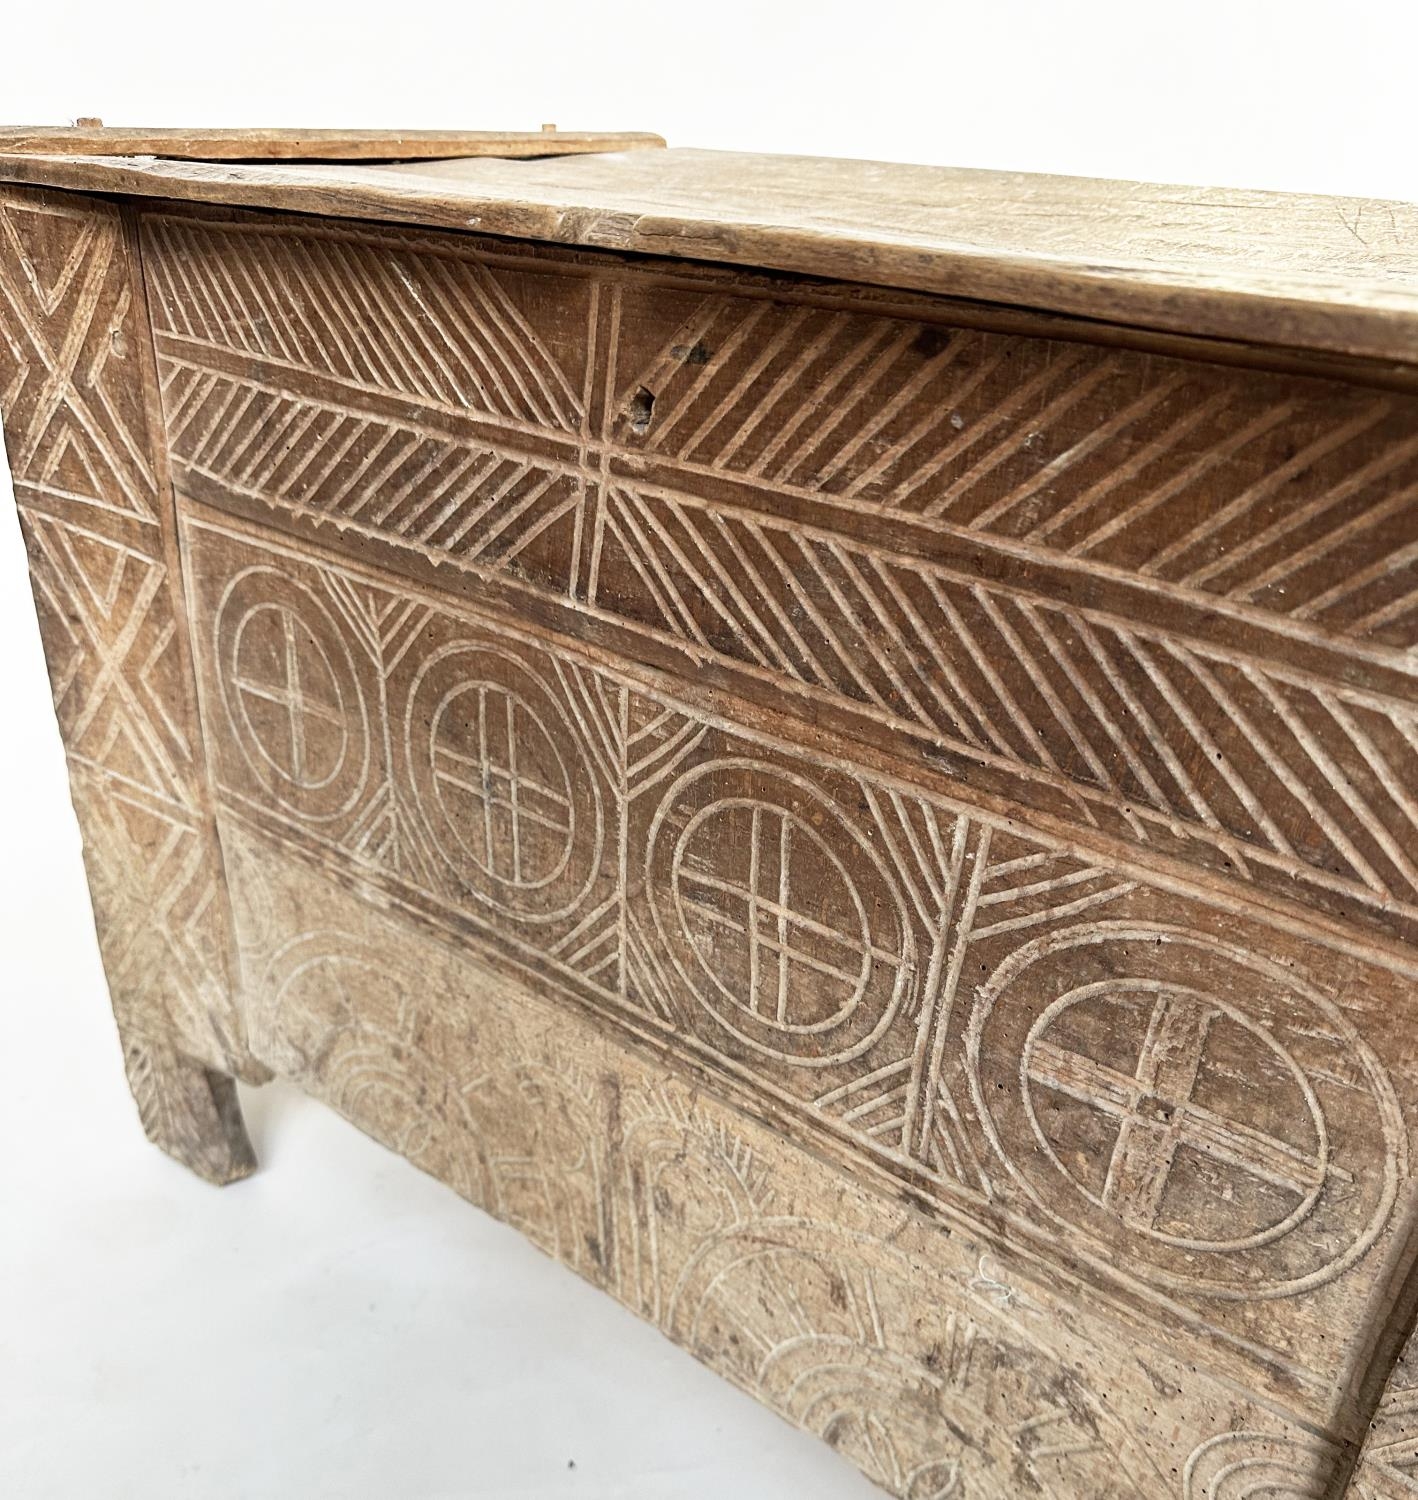 SCANDINAVIAN KISTA TRUNK, early 18th century sycamore of pegged construction with chip decorated - Image 12 of 12